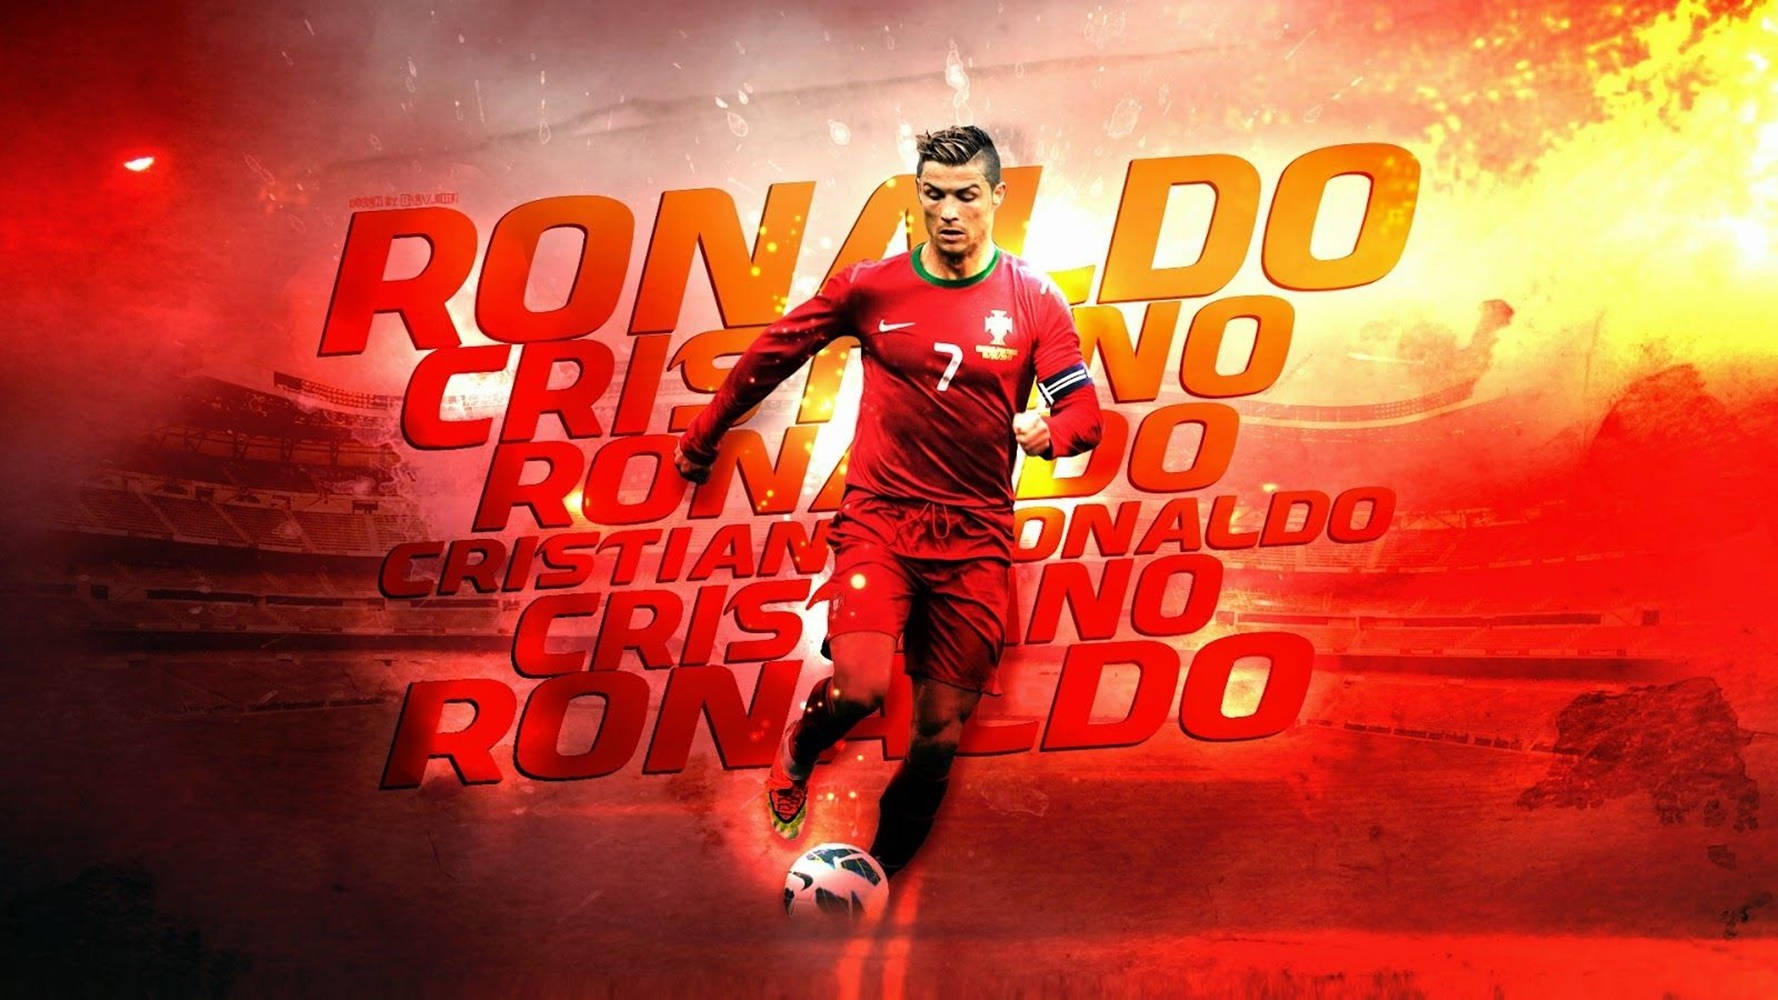 Cristiano Ronaldo Cool Fiery Red Graphic Artwork Background